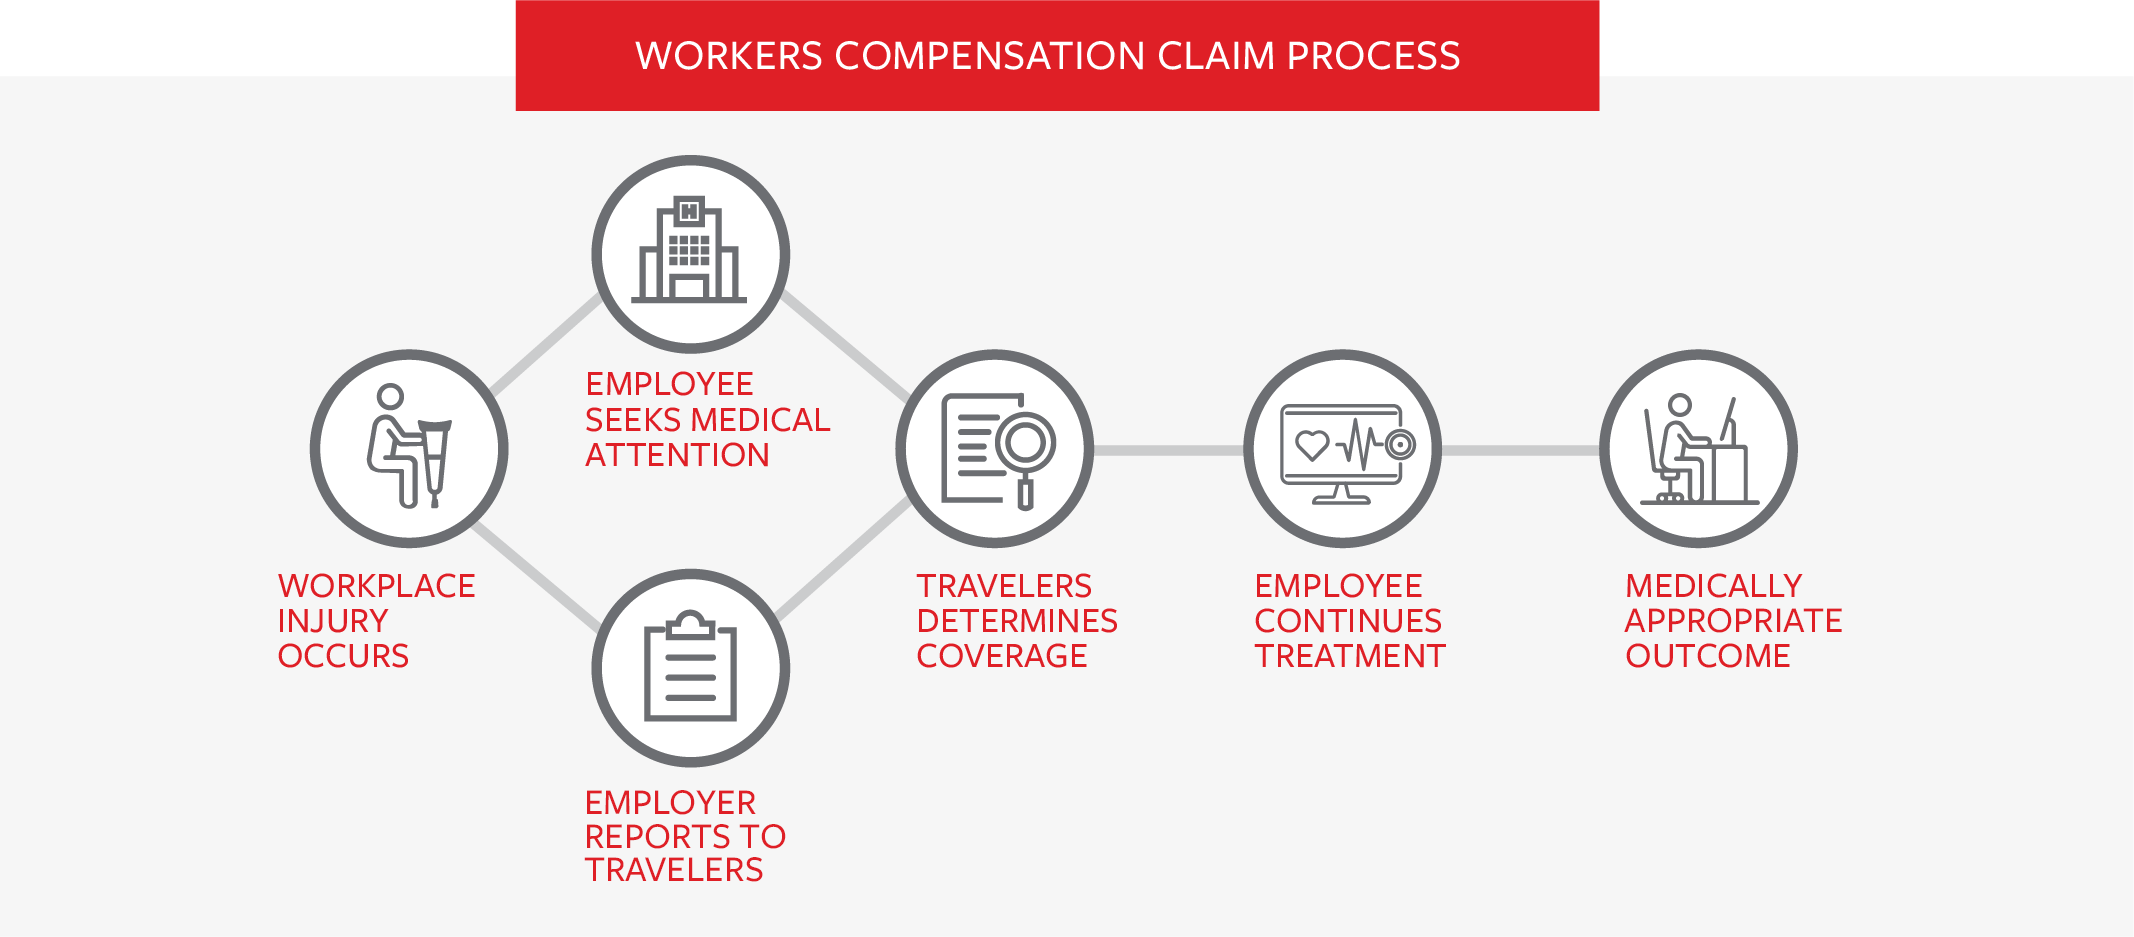 Workers Compensation claim process steps